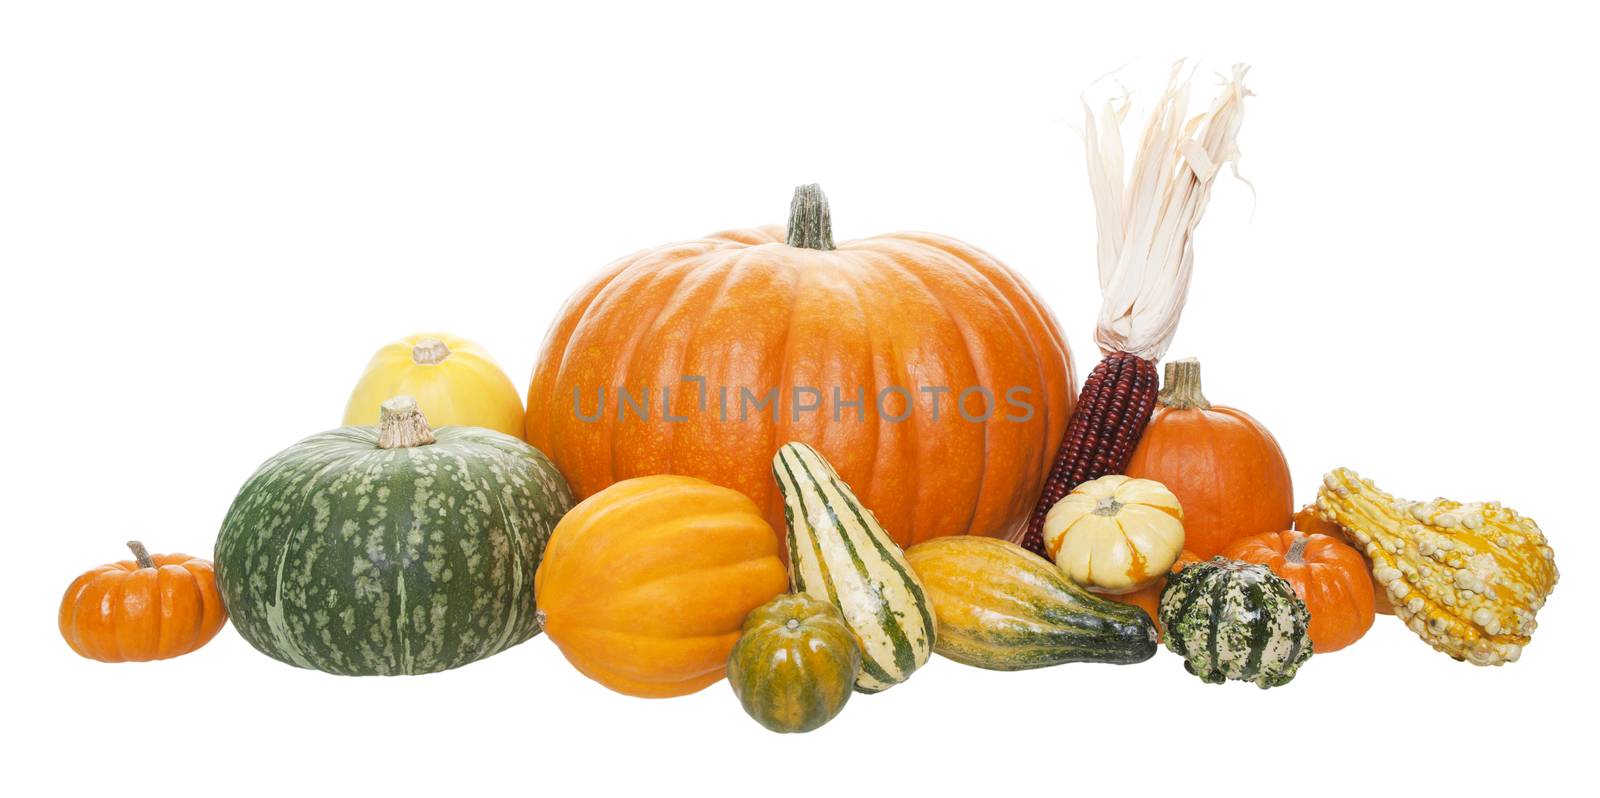 An arrangement of freshly harvested pumpkins, squashes, and gourds.  Shot on white background.